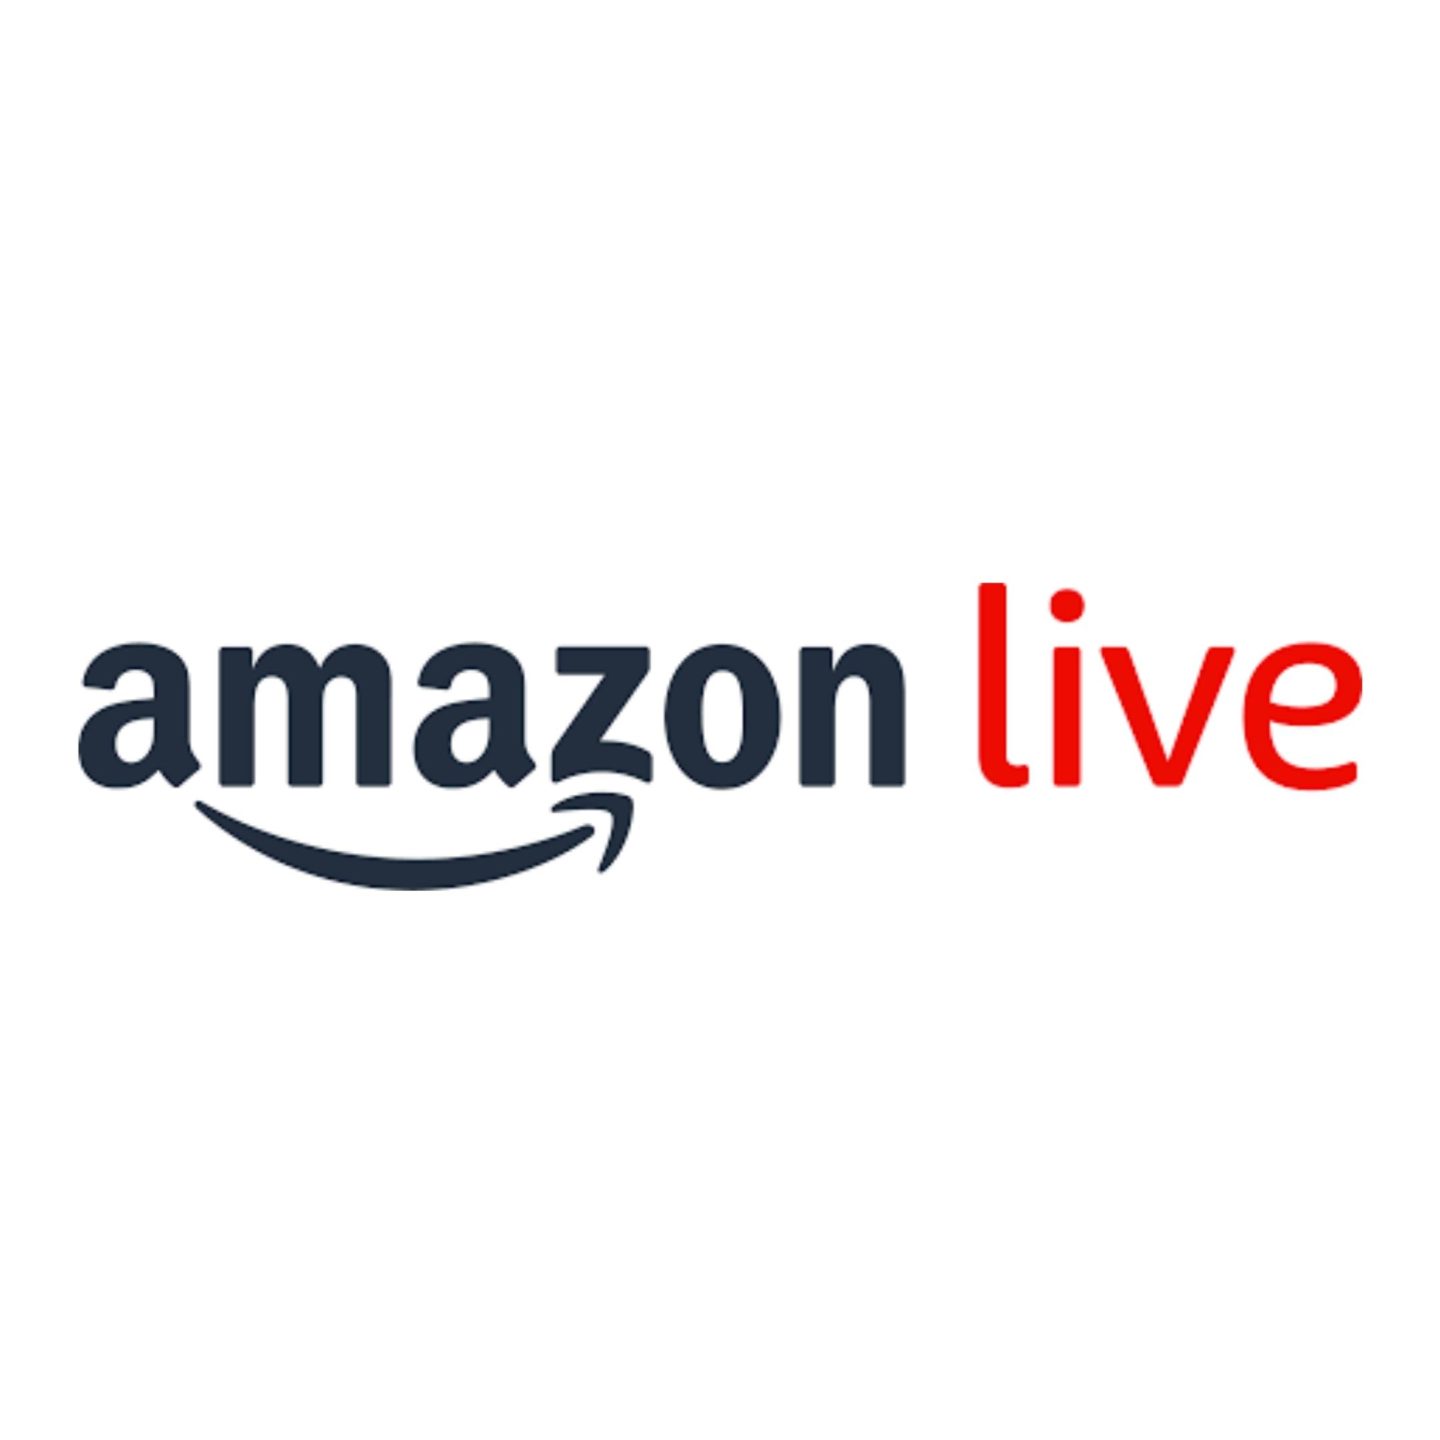 Amazon Live Streaming featuring influencer Kelly Page for BlueGrayGal.